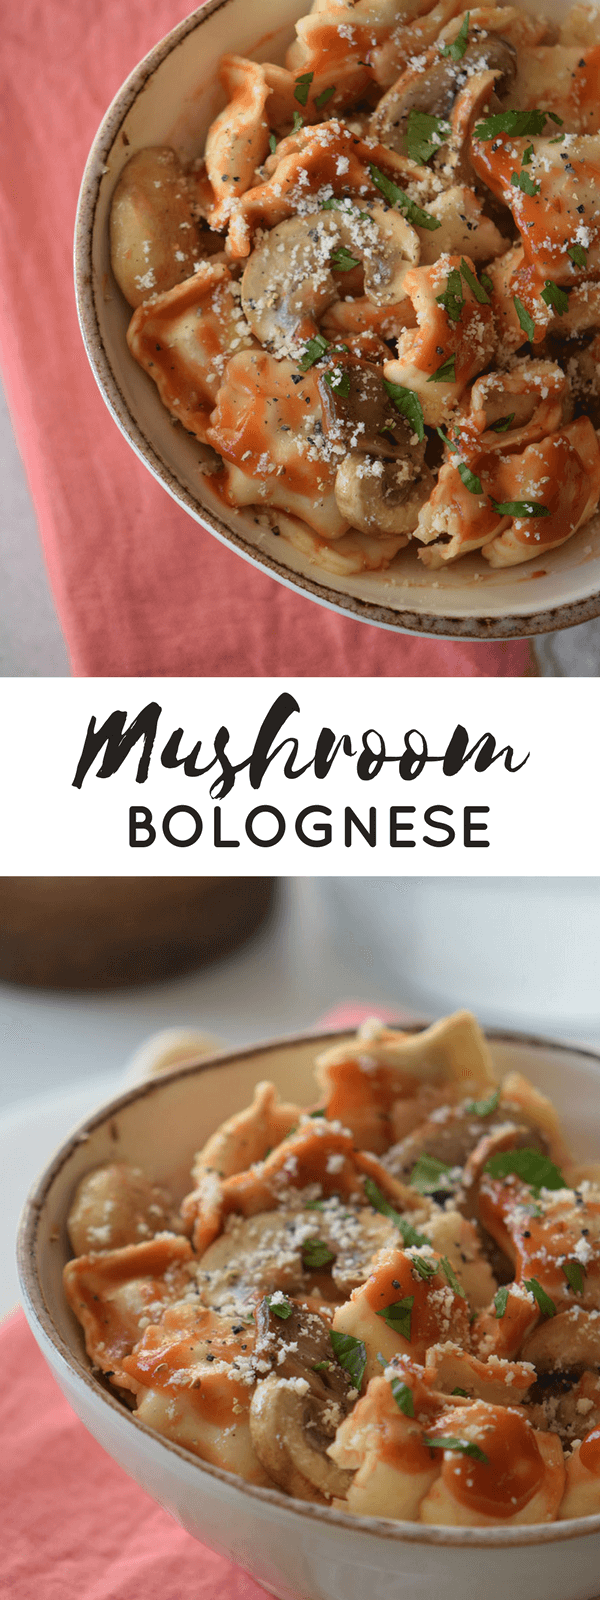 This hearty, homemade mushroom bolognese sauce is easy to make and pairs well with ravioli, gnocchi, or any other pasta that your heart desires.